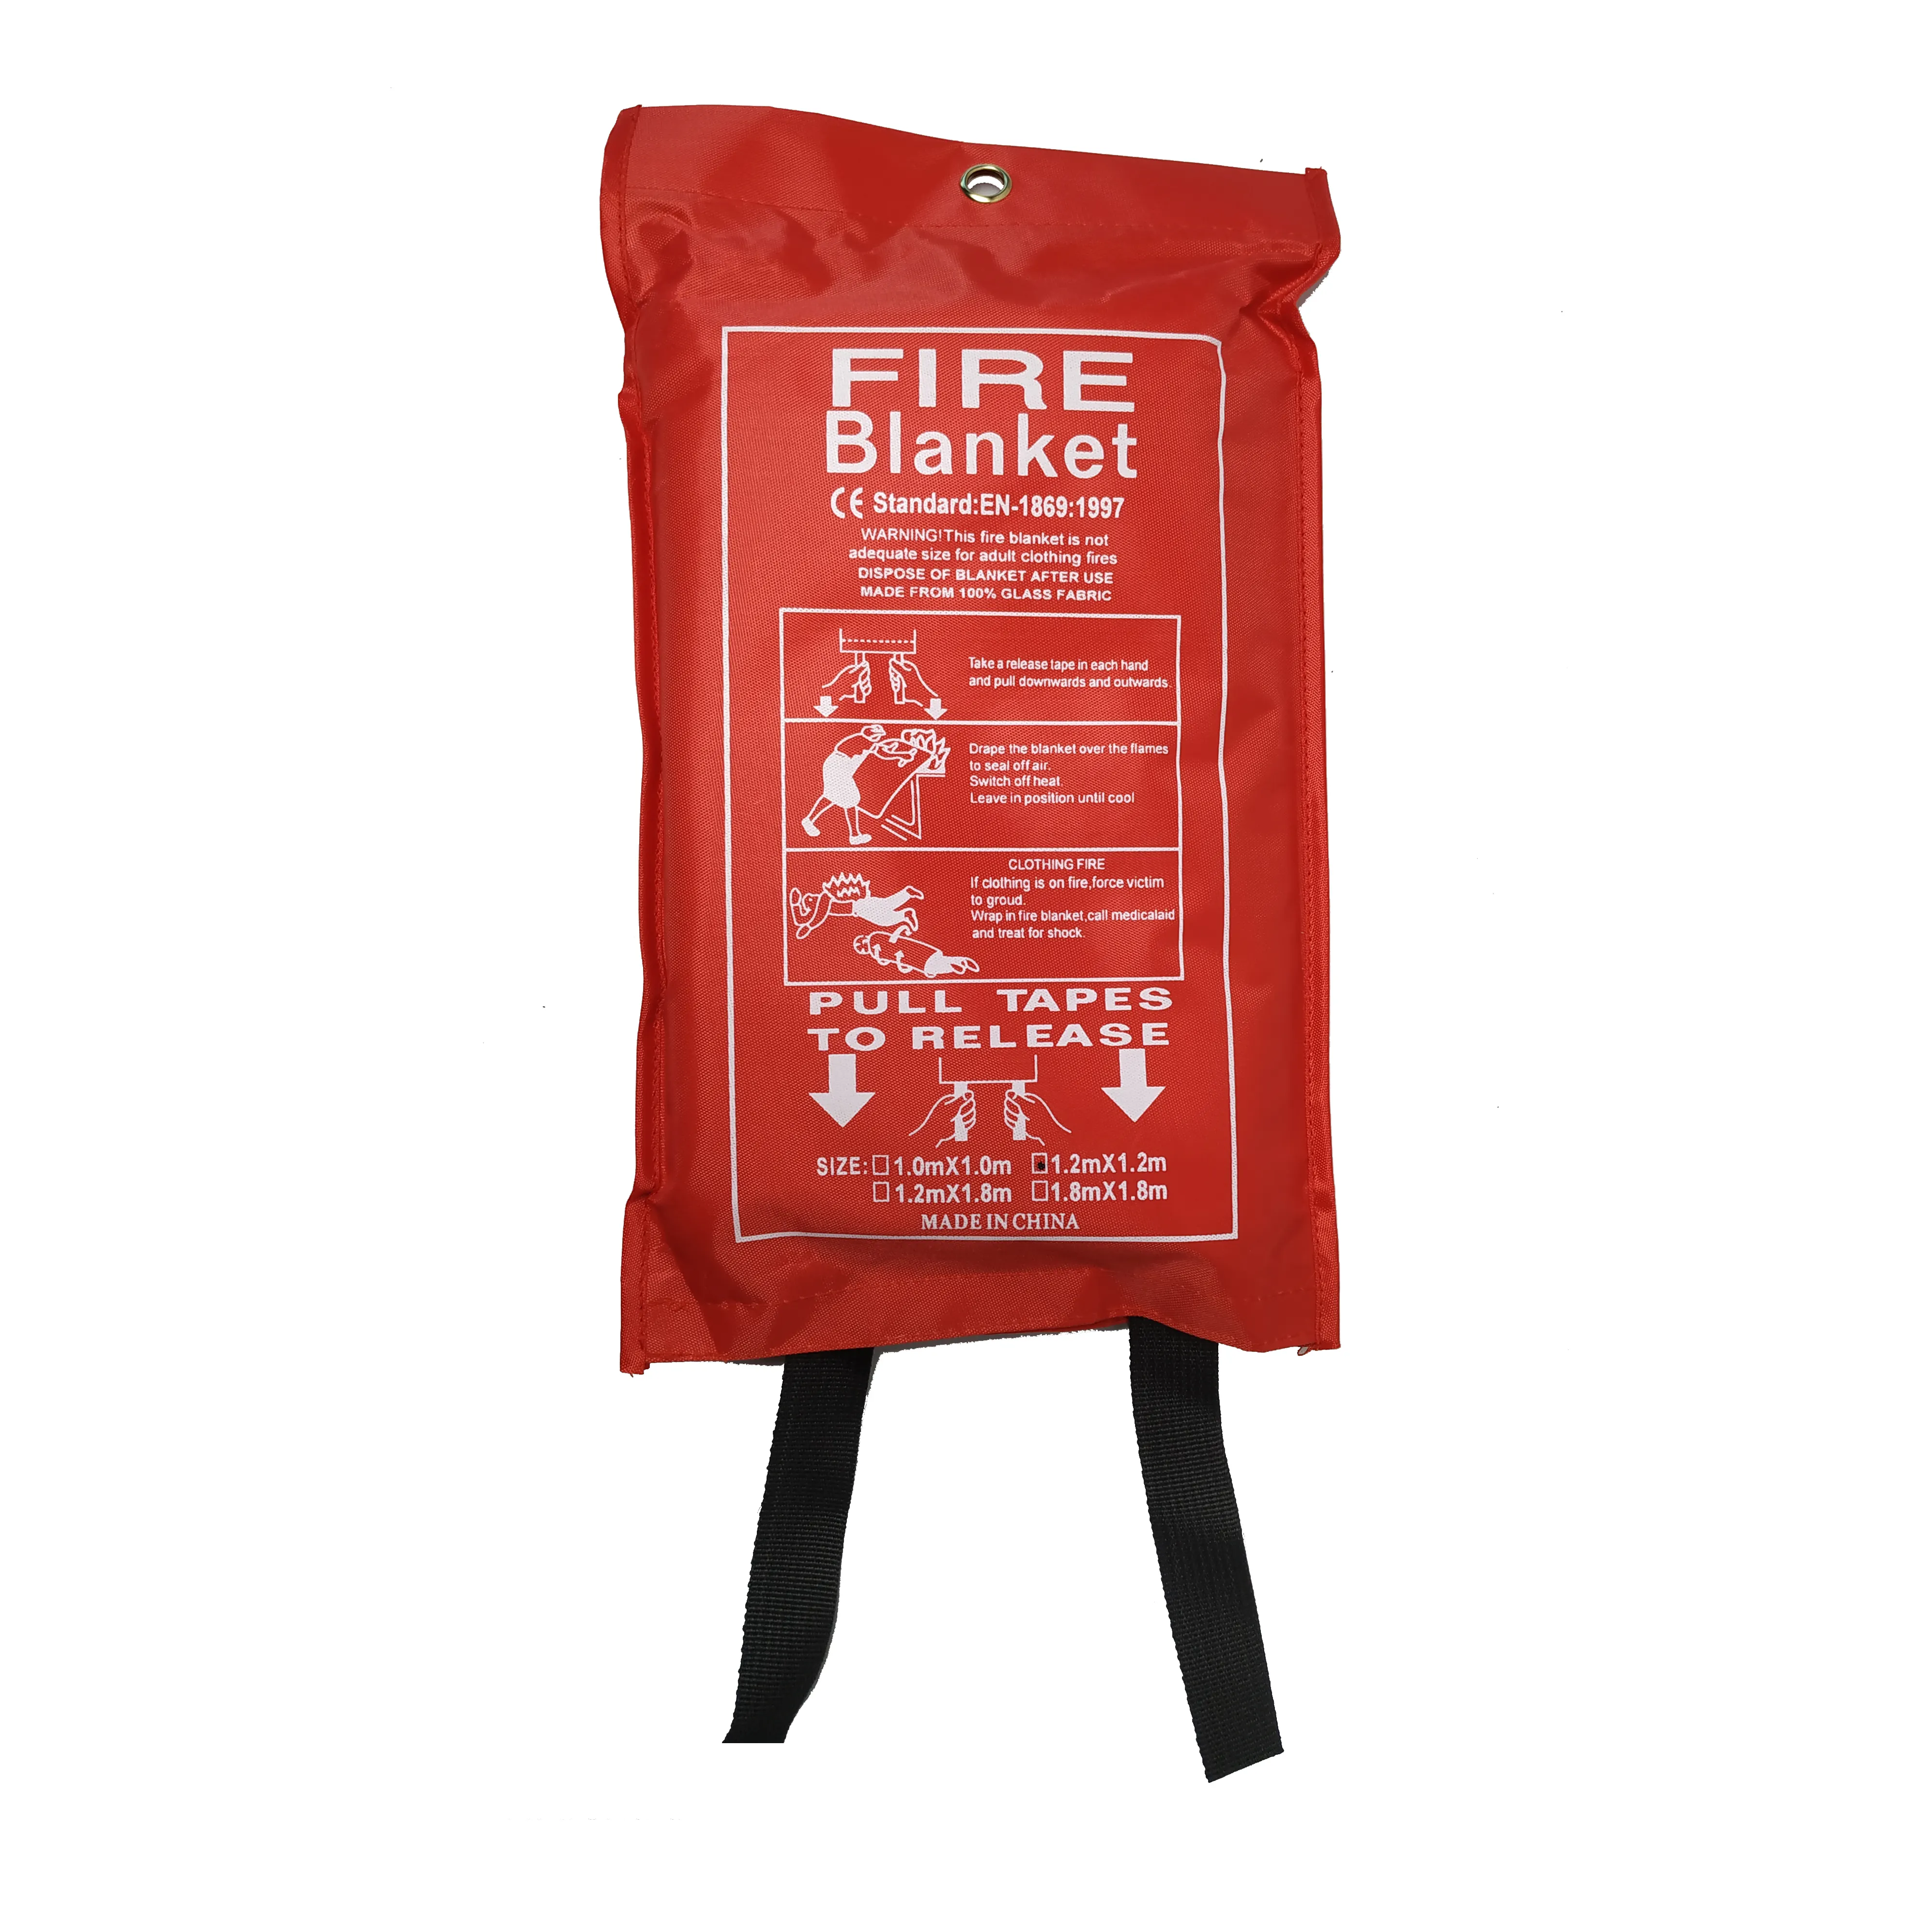 new safe fire fighting equipment types of fire blanket for home , hotel , car , kitchen